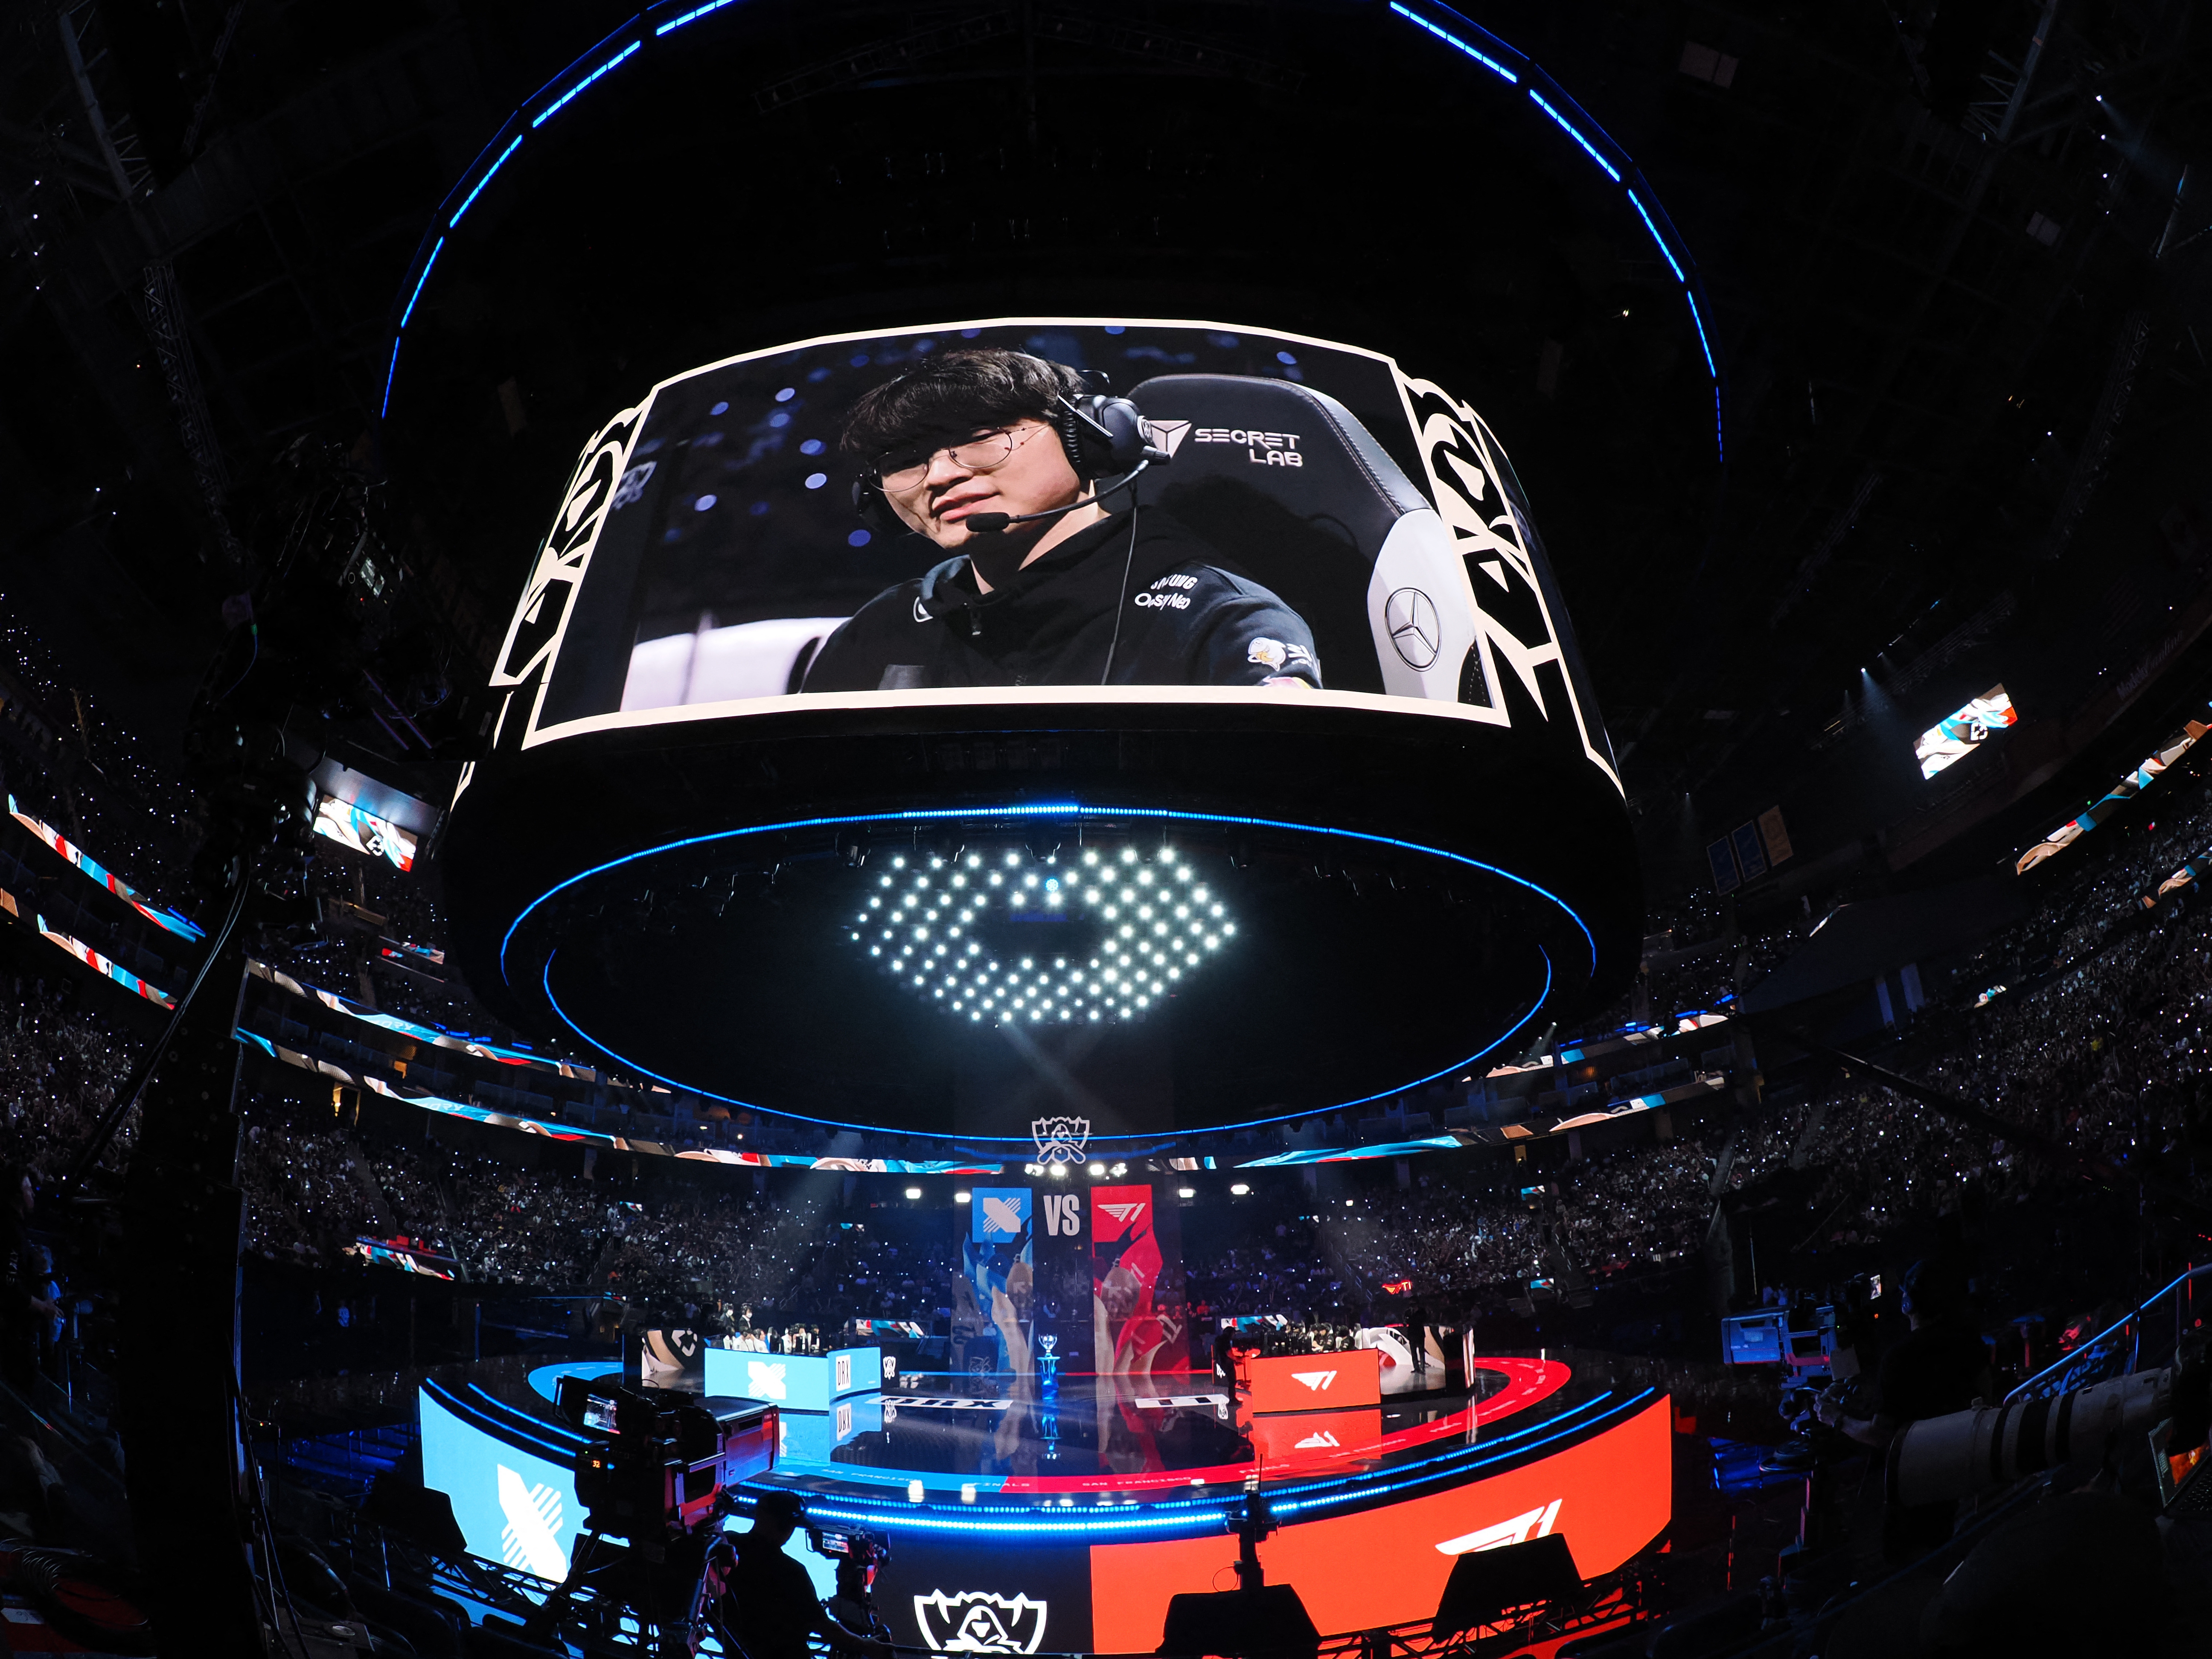 League of Legends Worlds: Can 'Golden Left Hand' top 'Faker' to